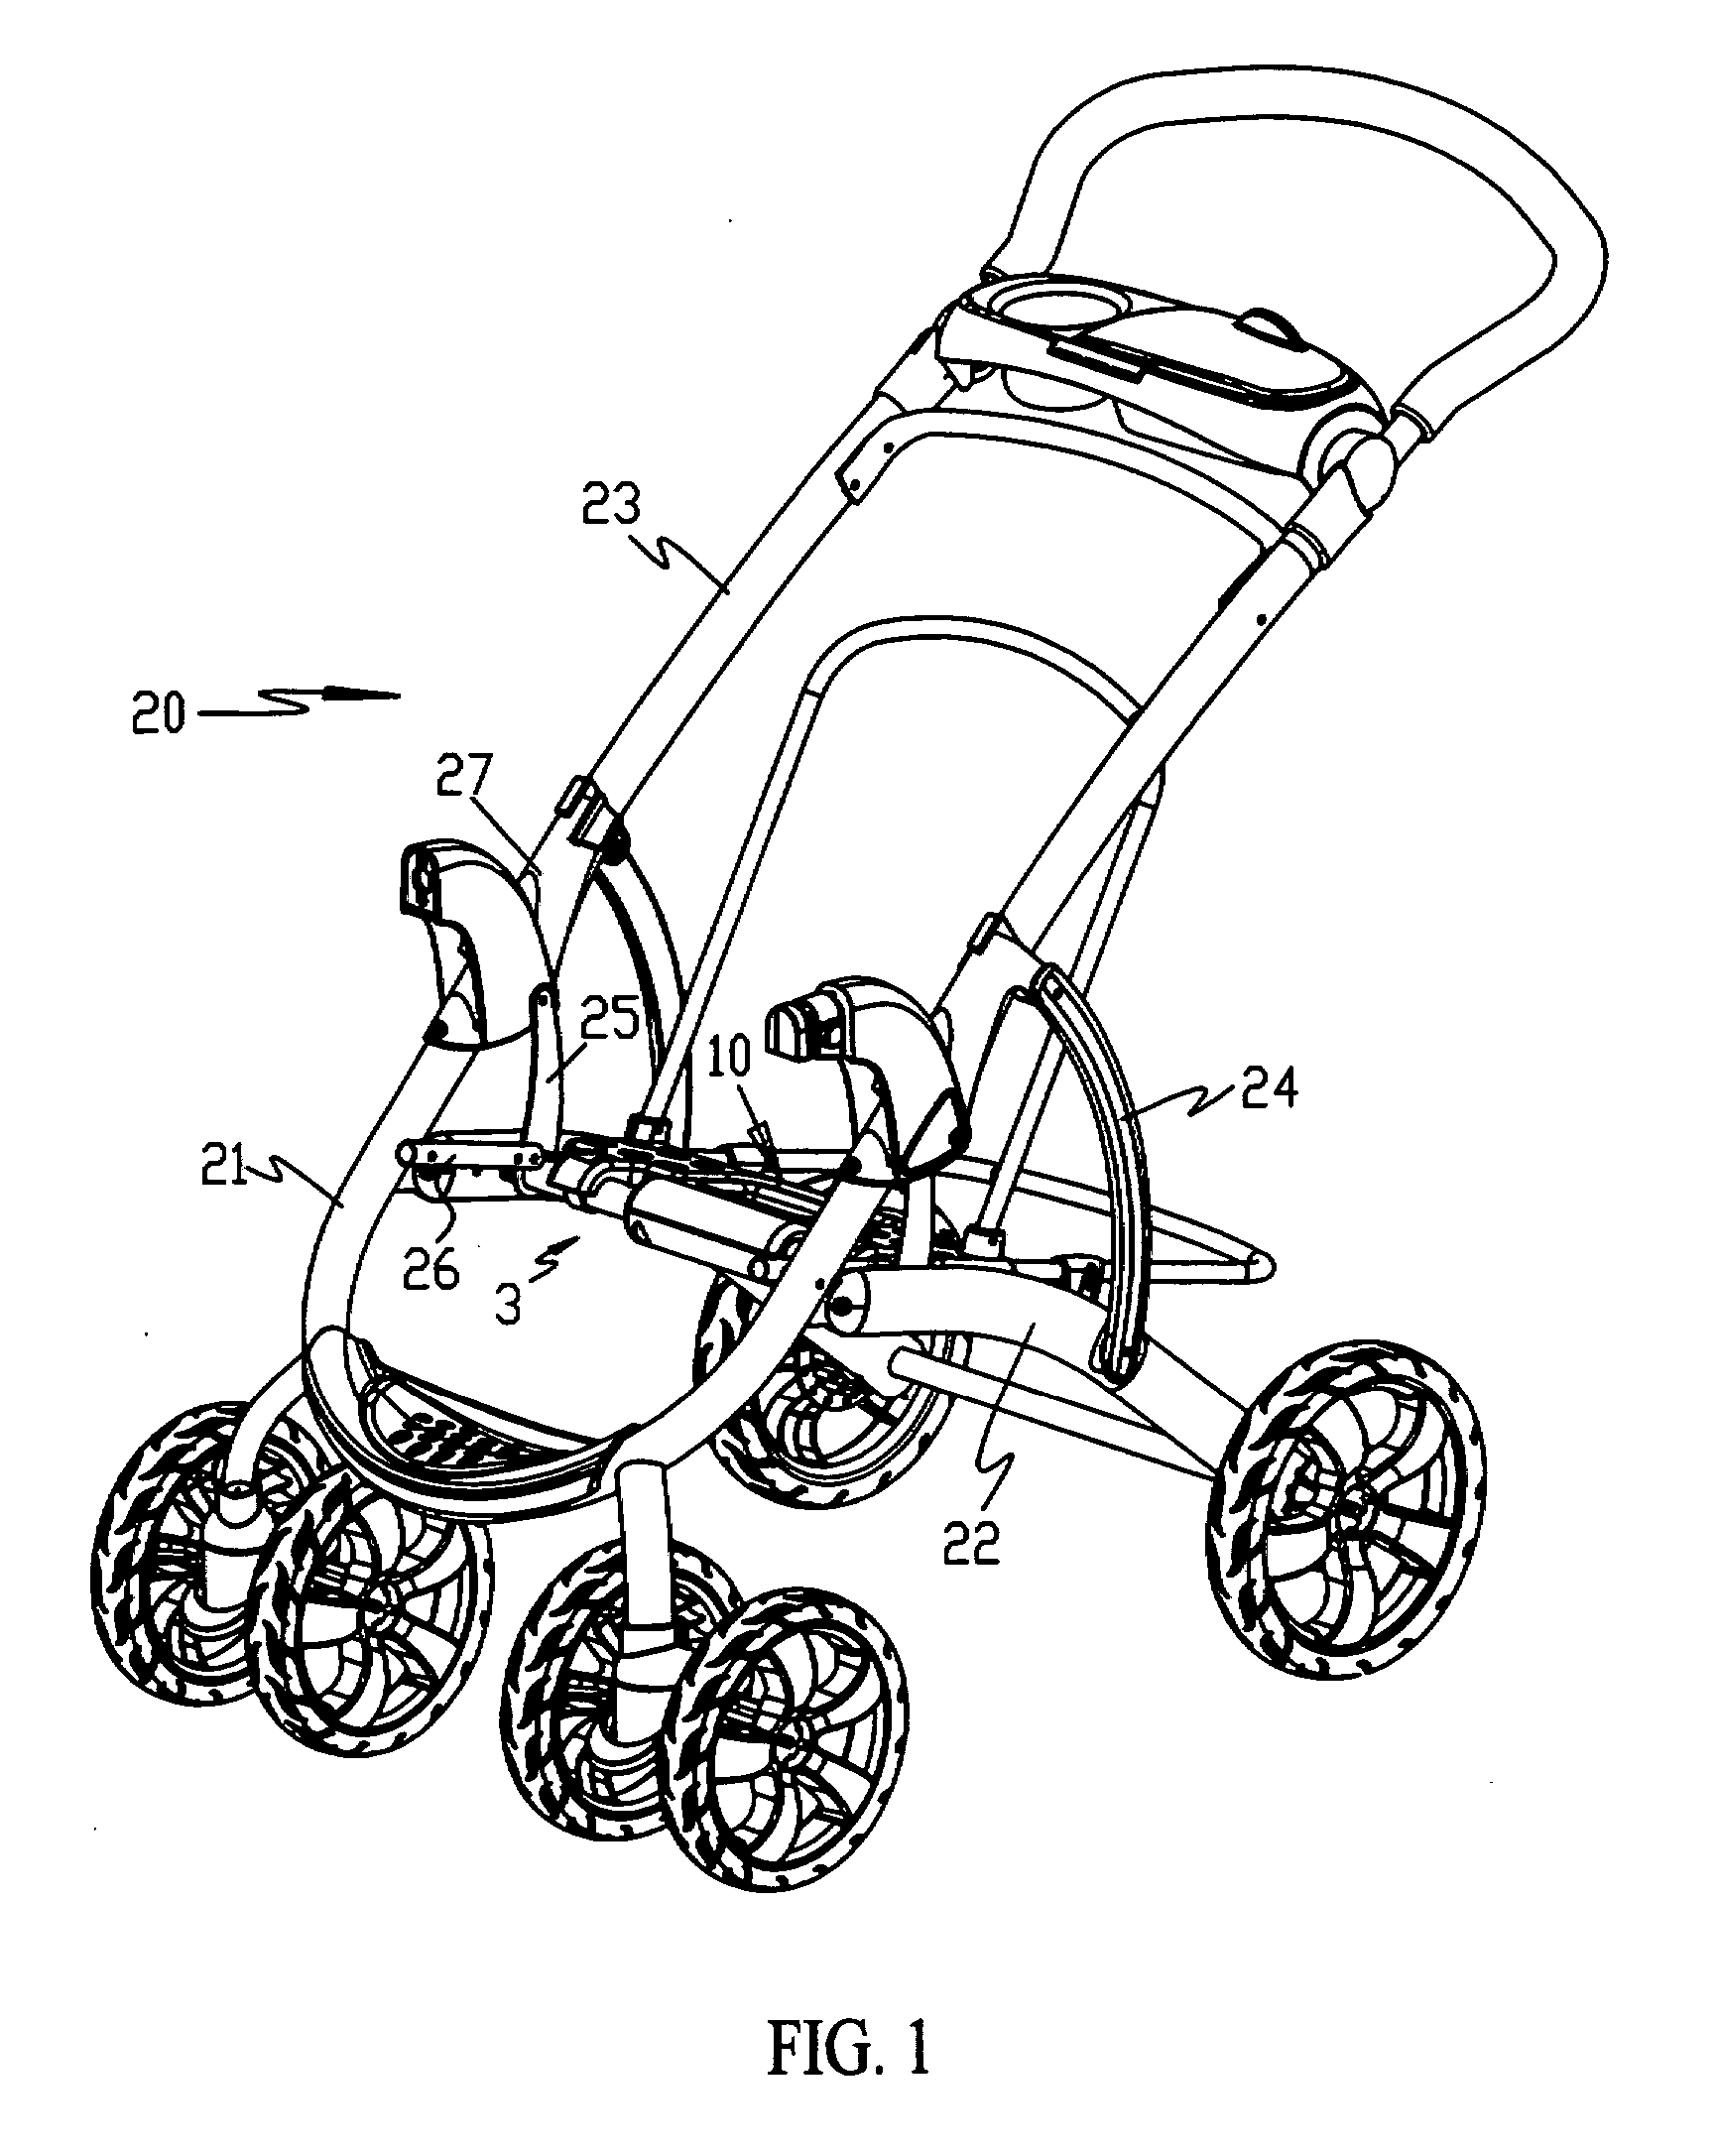 One hand release mechanism for stroller